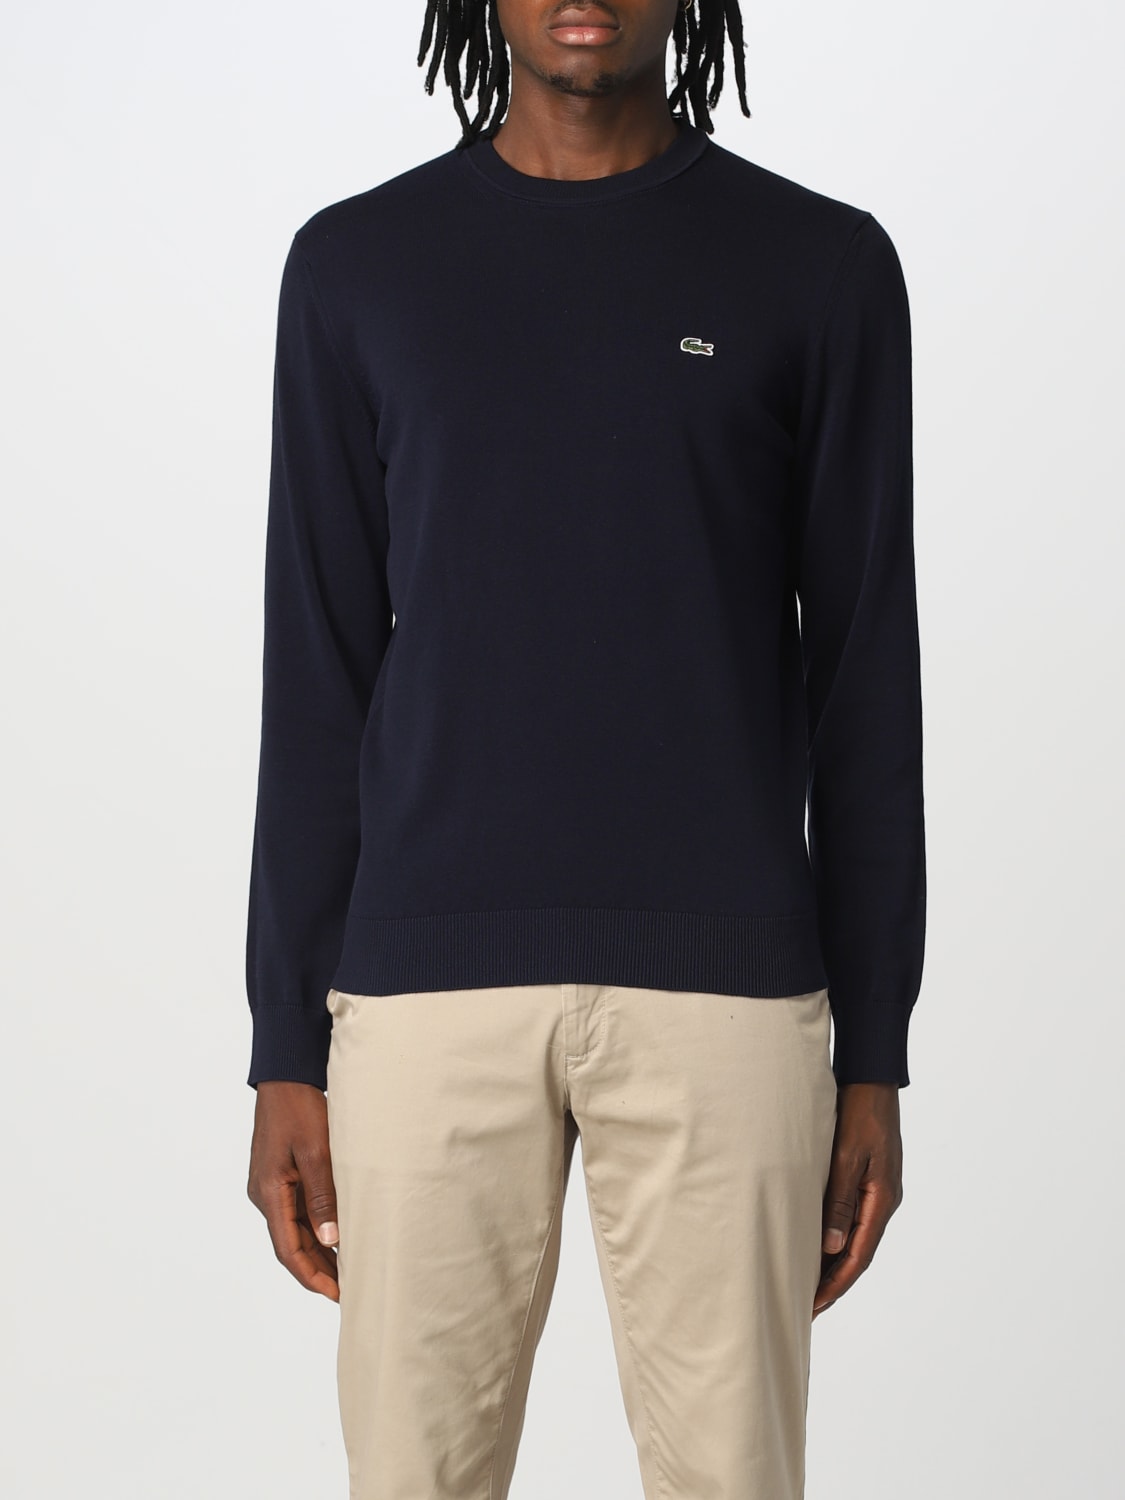 LACOSTE: sweater for man - Black | Lacoste sweater AH2193 online at ...